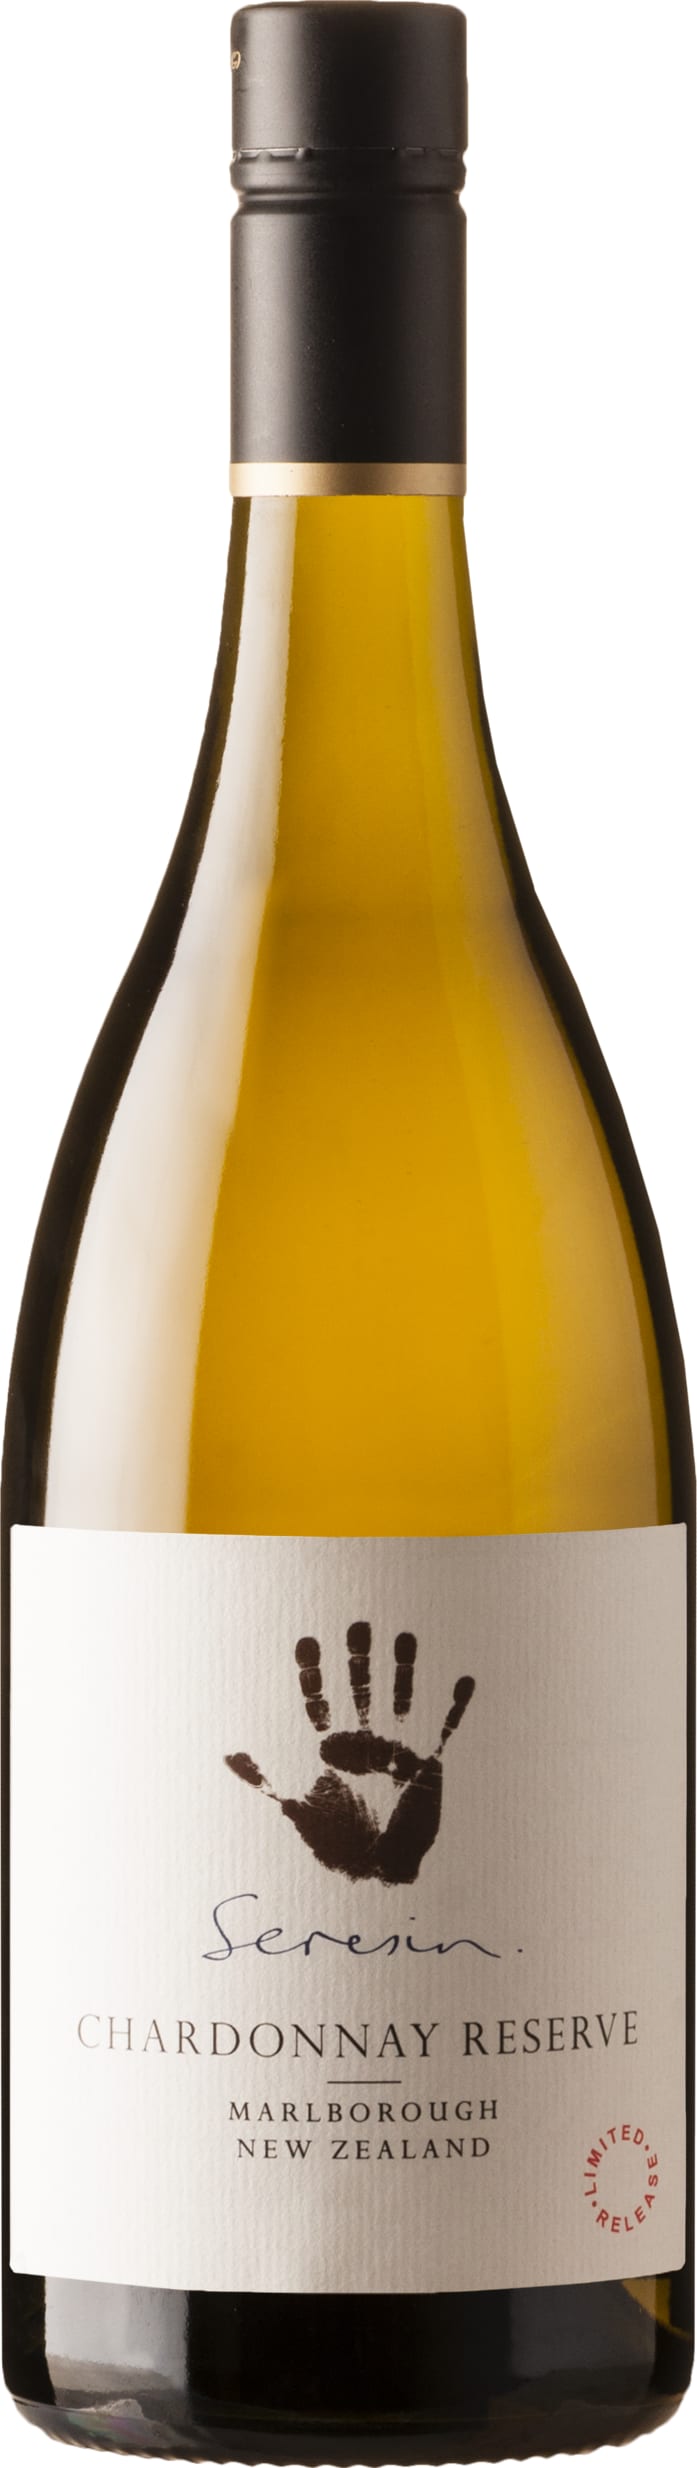 Seresin Estate Reserve Chardonnay 2022 75cl - Buy Seresin Estate Wines from GREAT WINES DIRECT wine shop